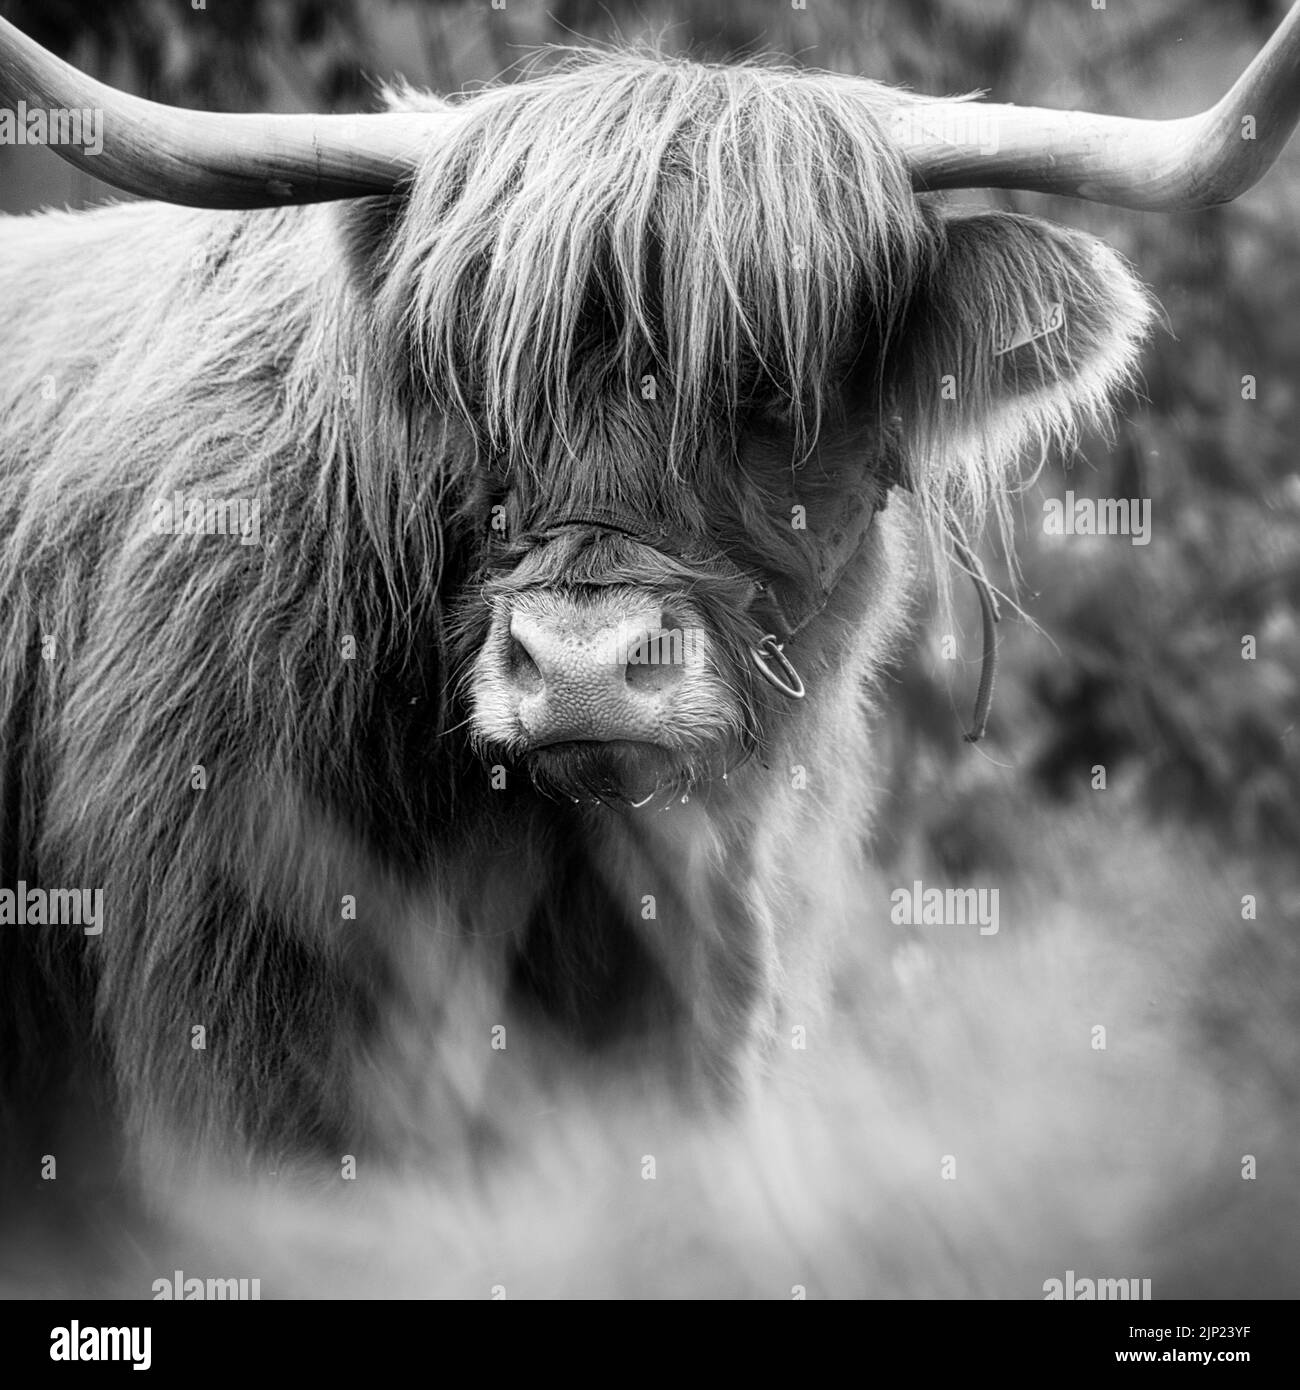 Closeup of a Scottish Highland cattle in monochrome, black and white Stock Photo